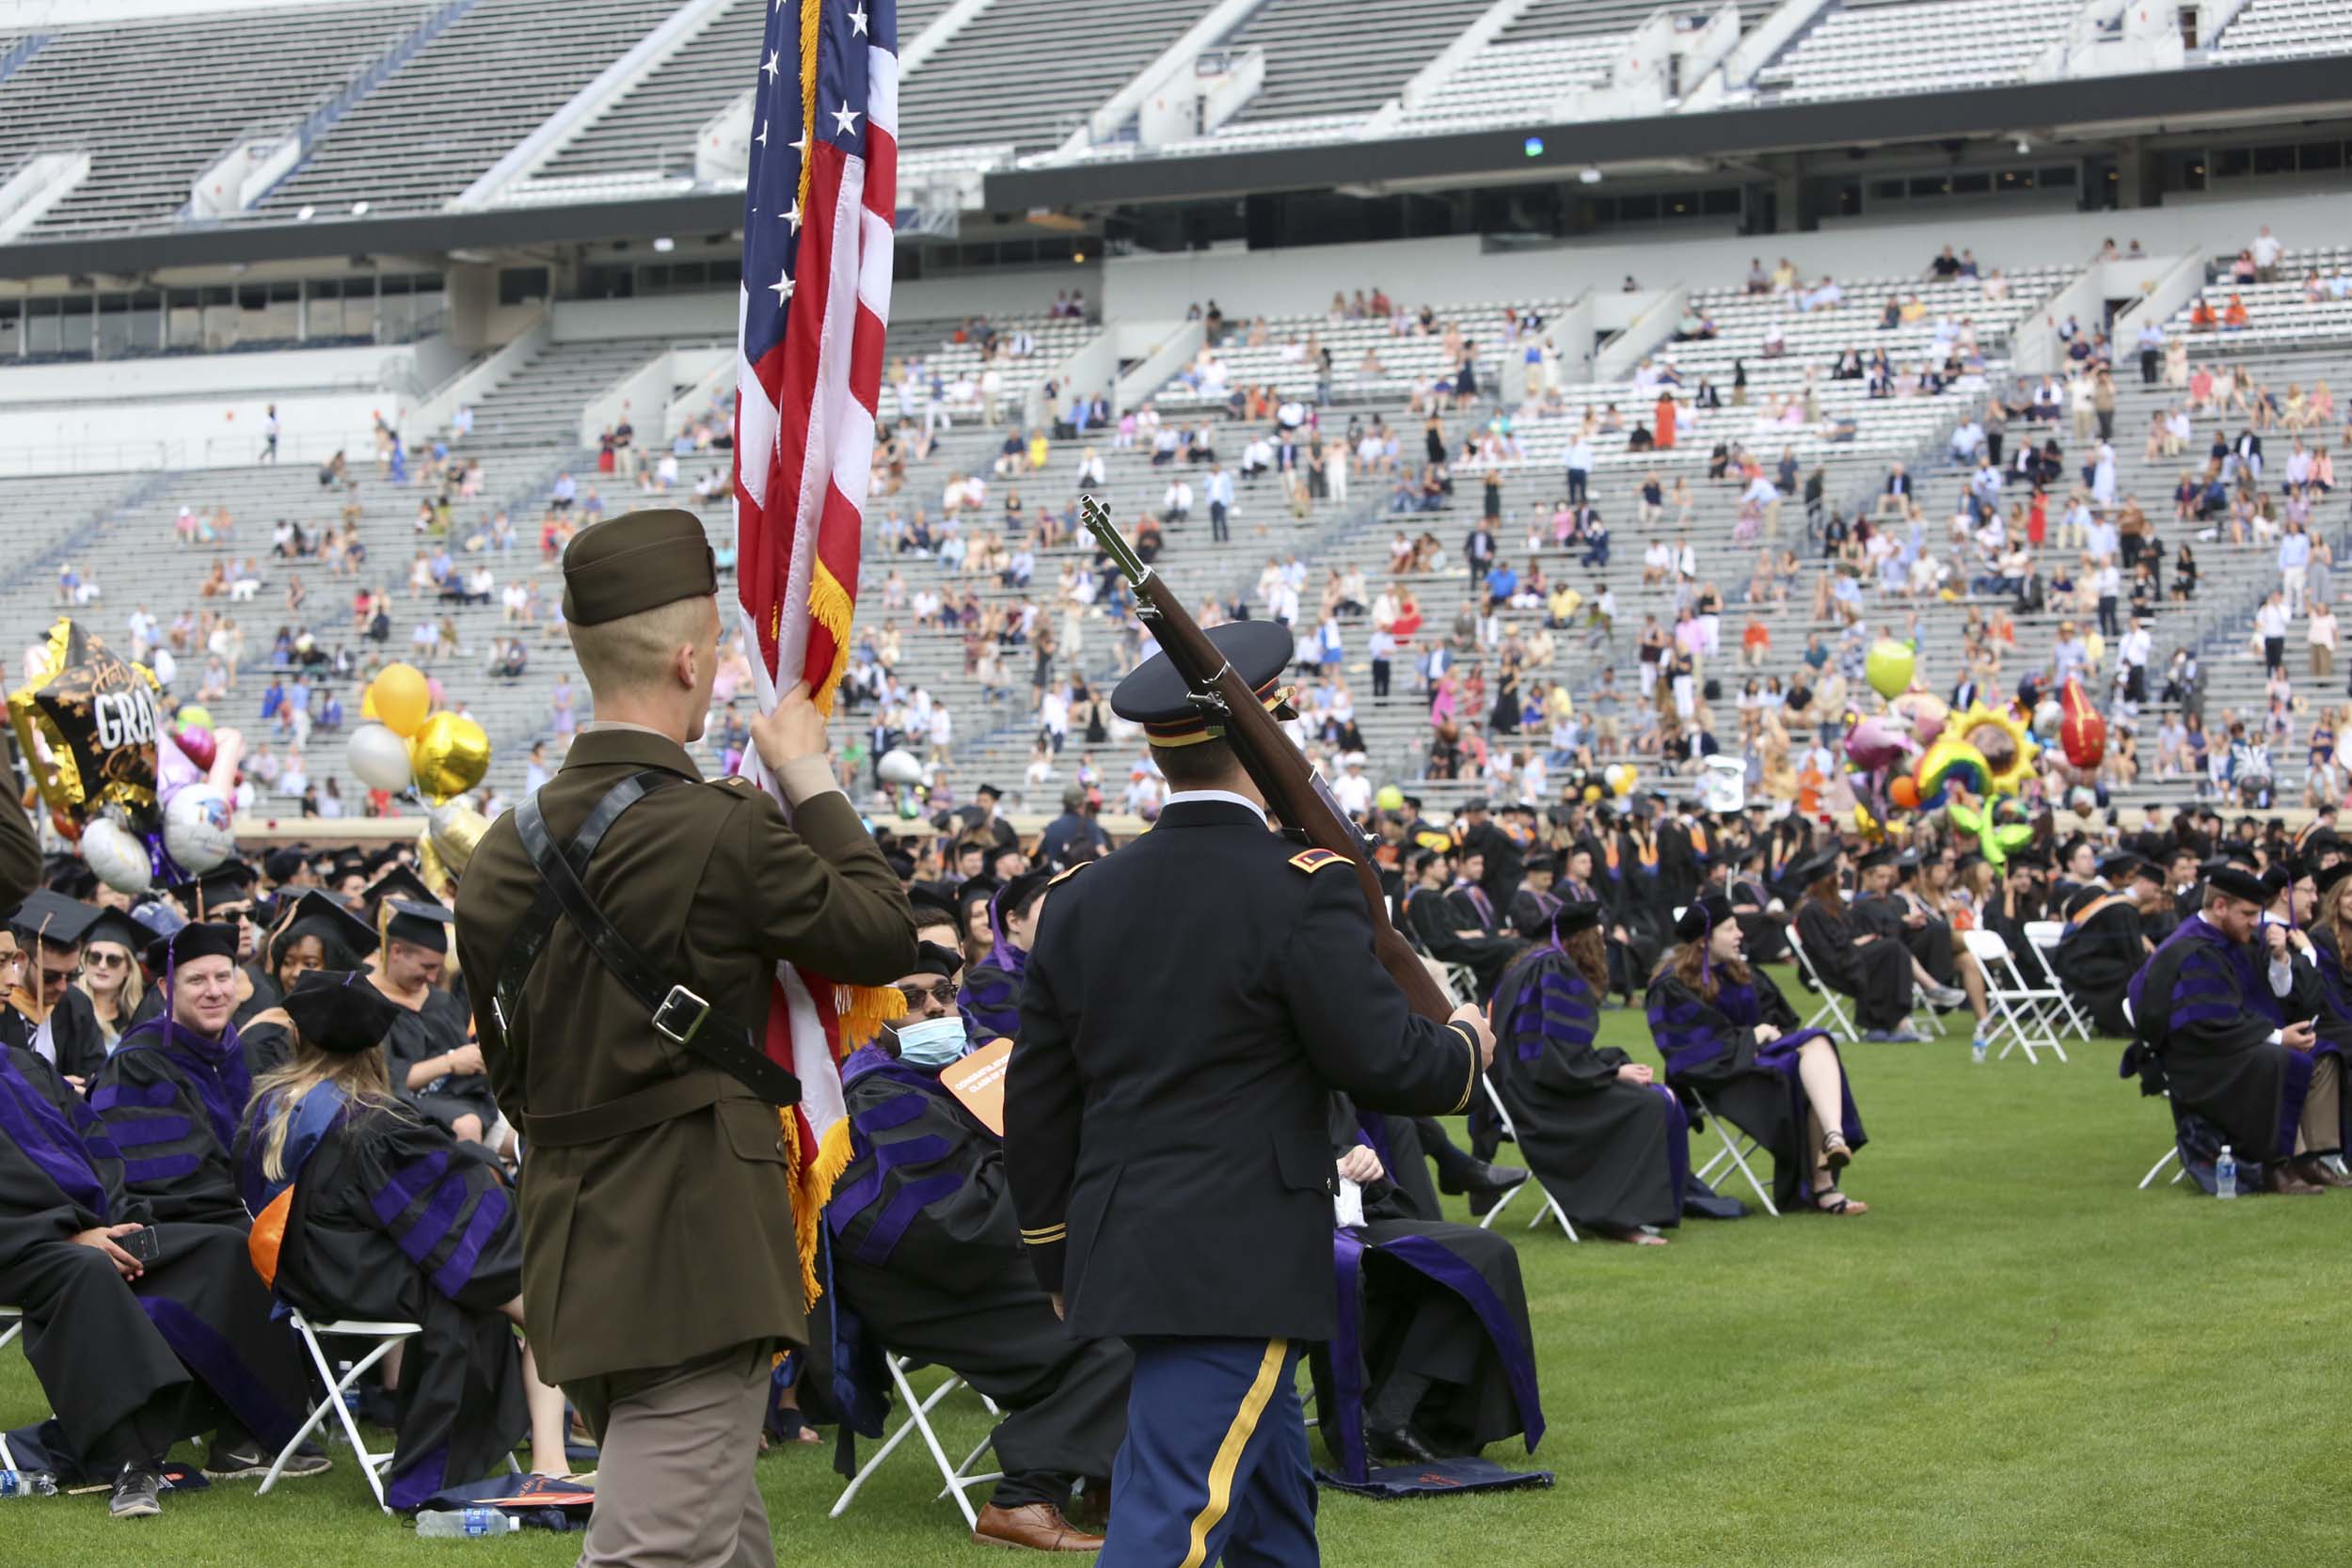 US Military Color Guard processing in carrying the United States of America's flag